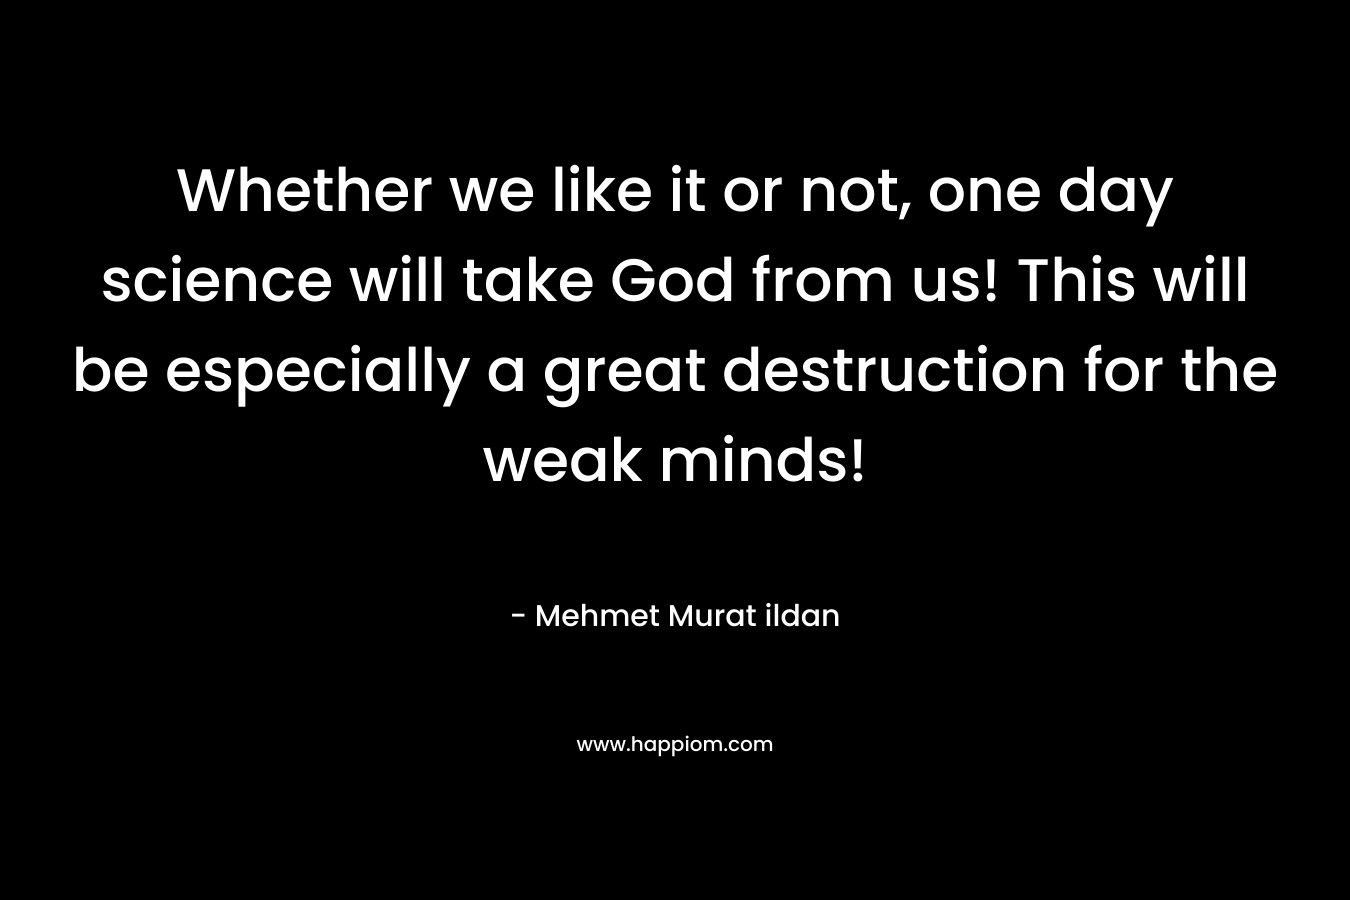 Whether we like it or not, one day science will take God from us! This will be especially a great destruction for the weak minds!